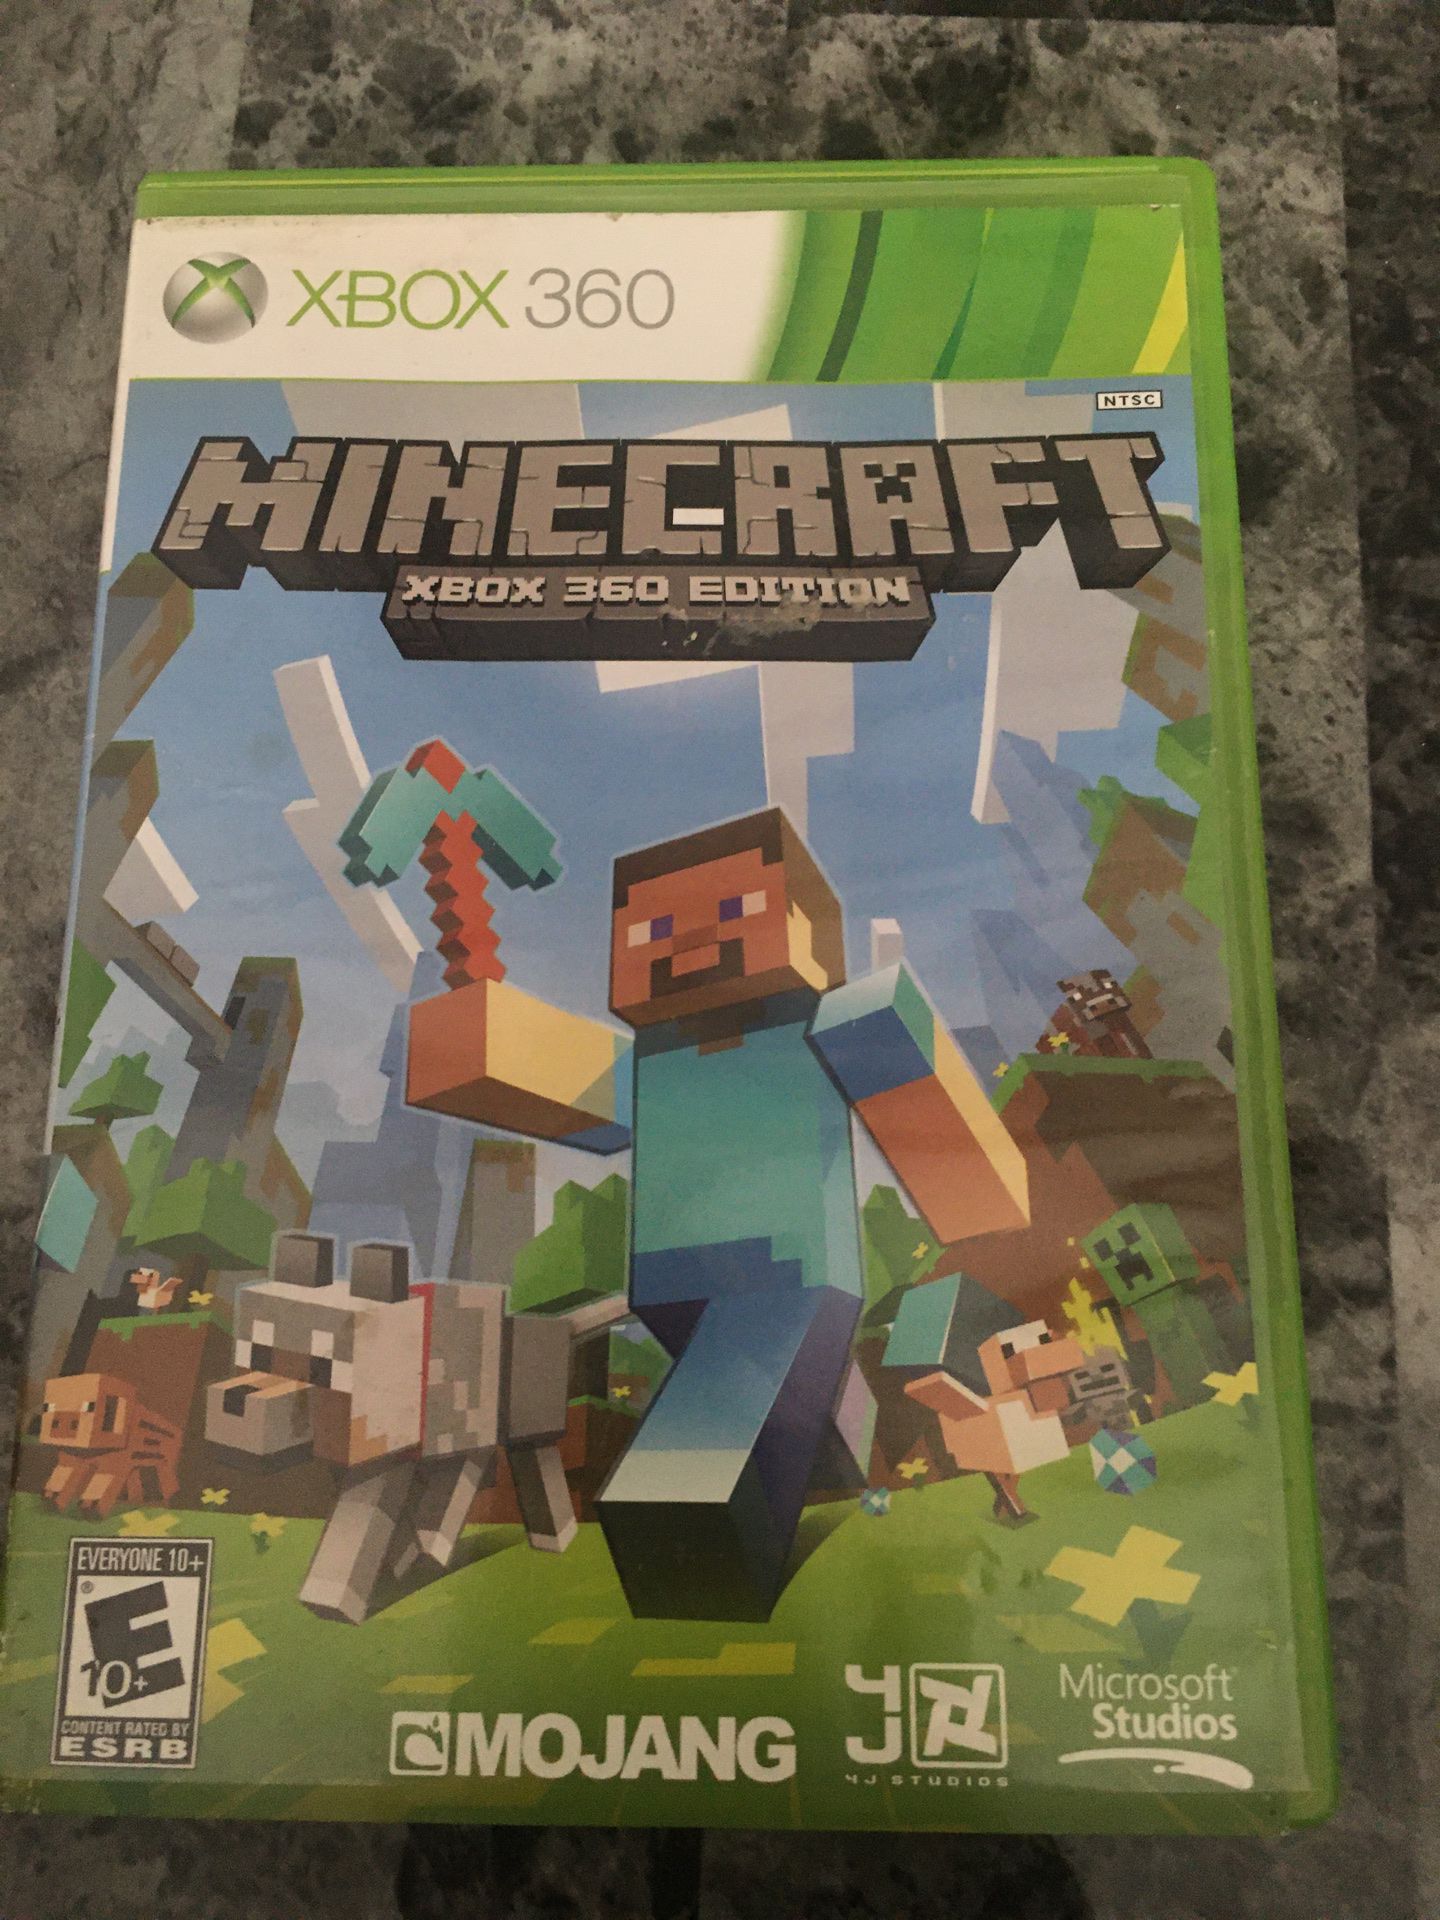 Mincraft game for Xbox 360